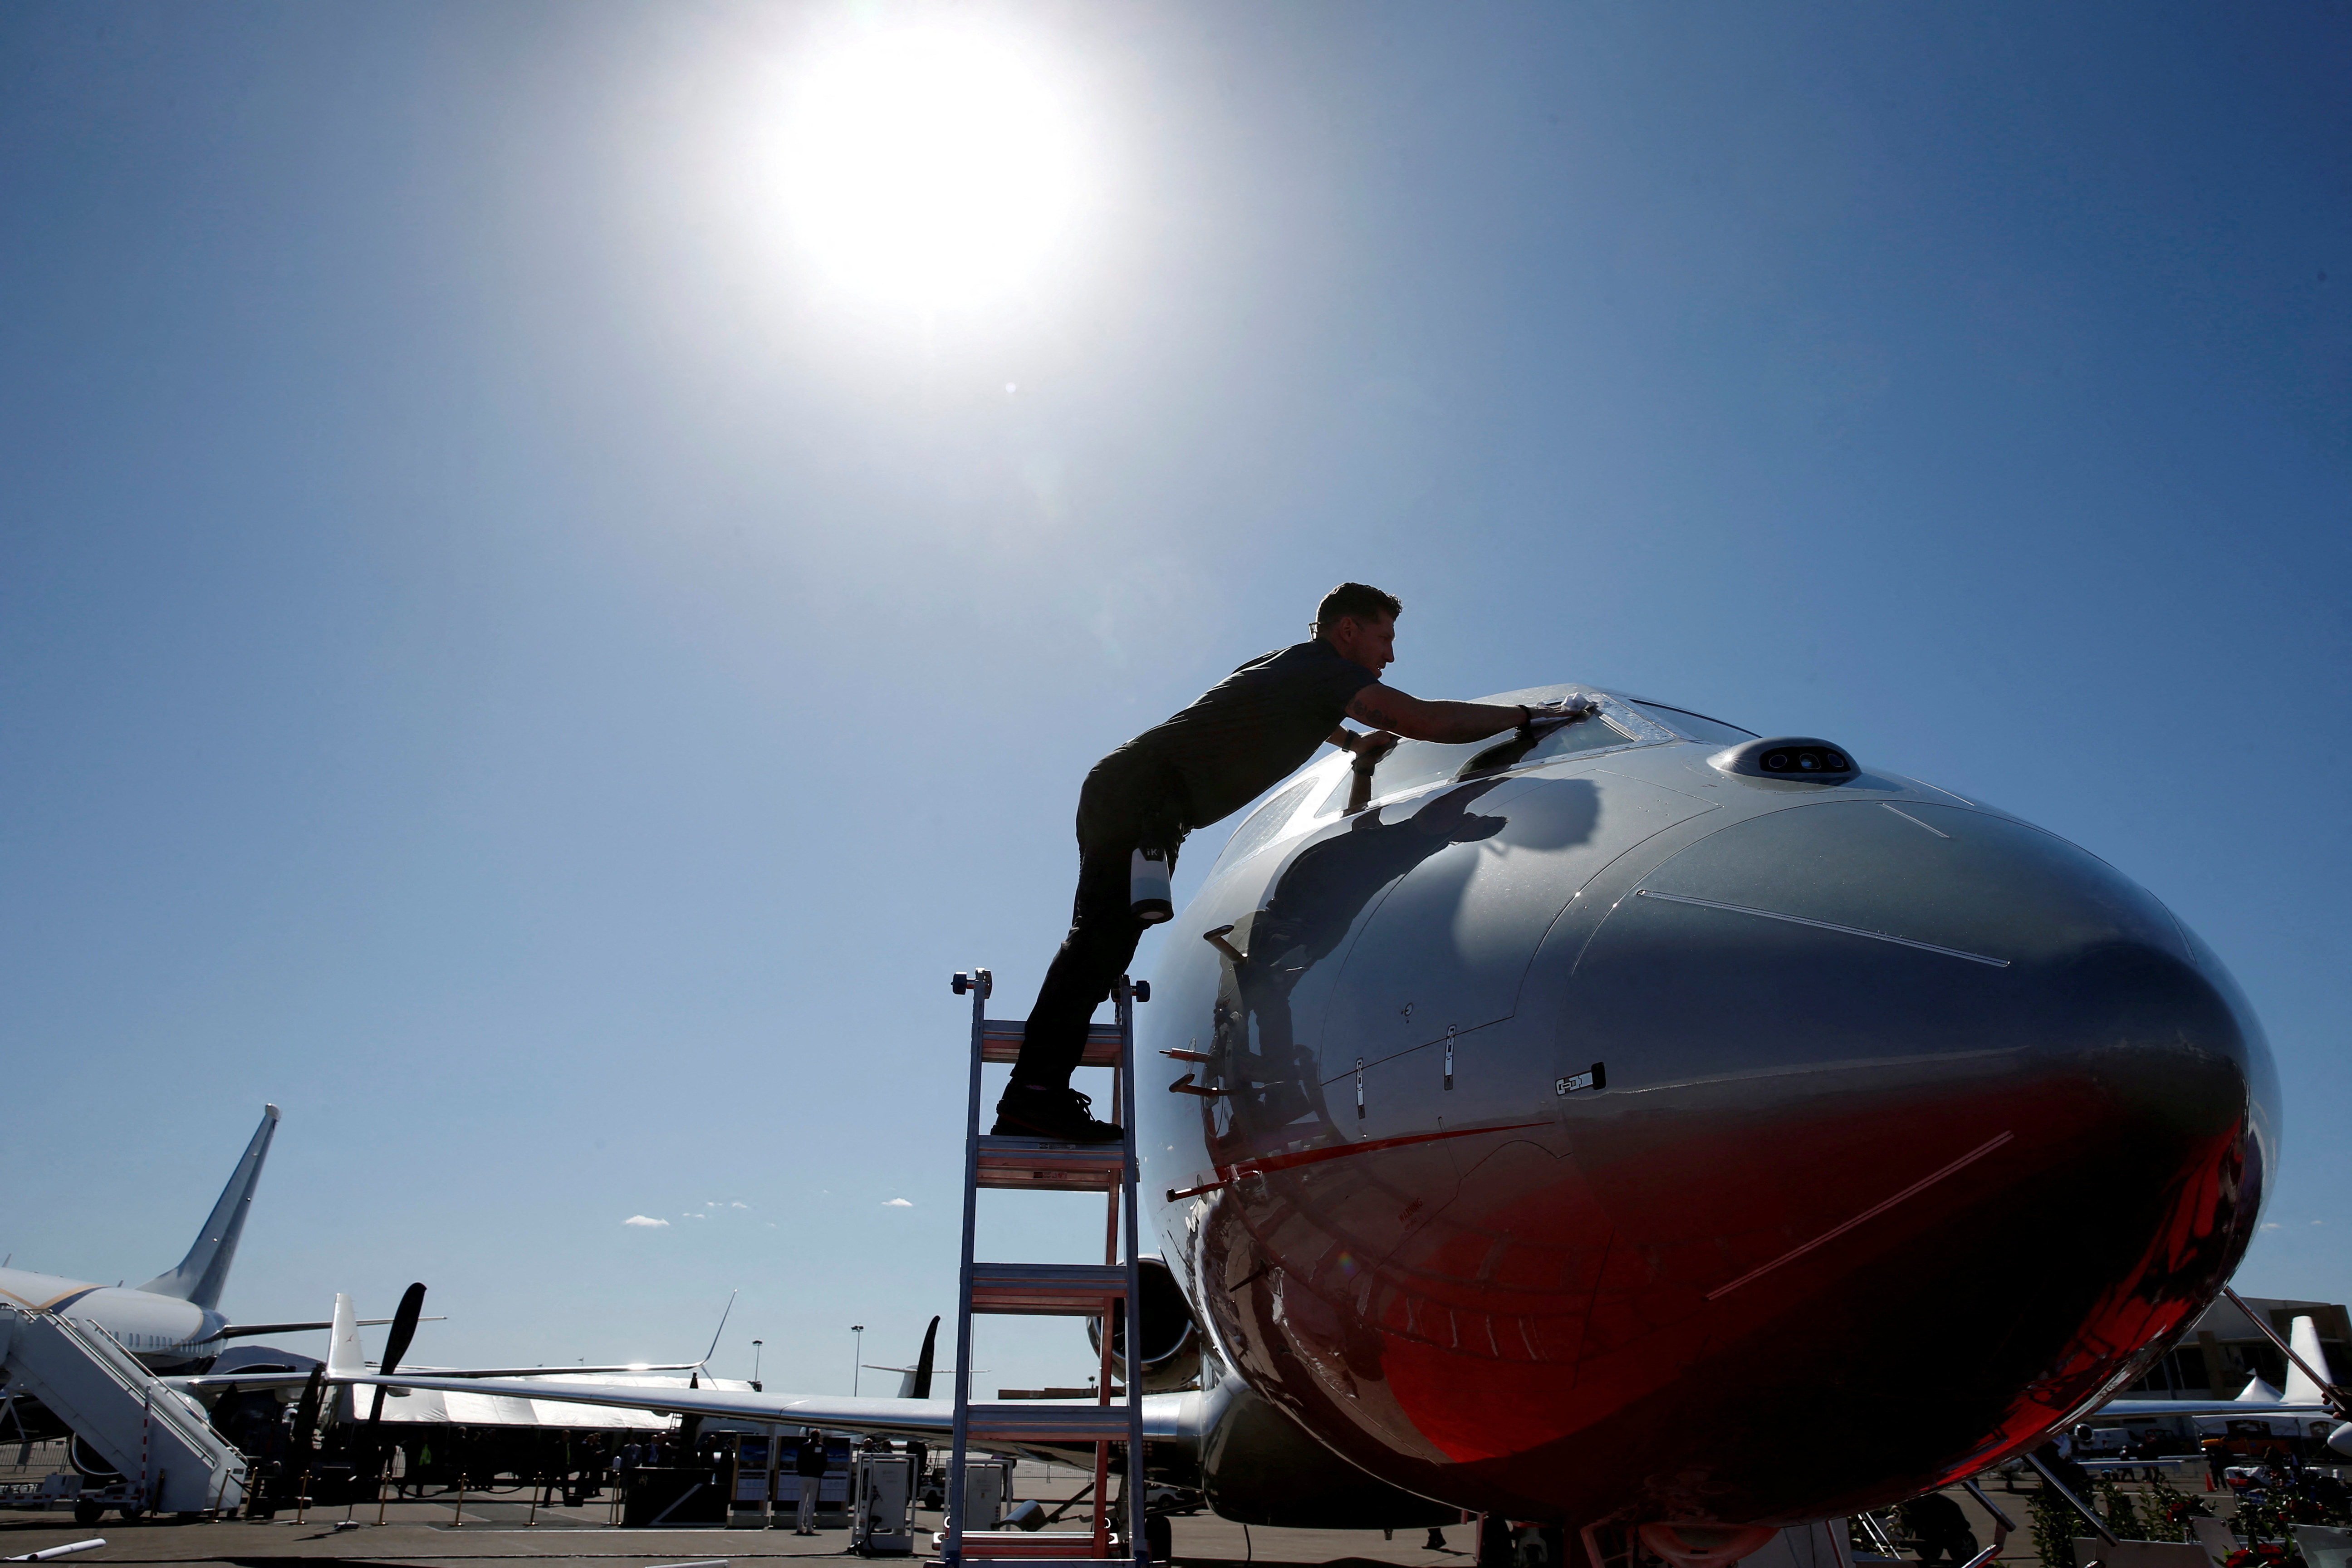 An aircraft detailer cleans the windshield of a business jet